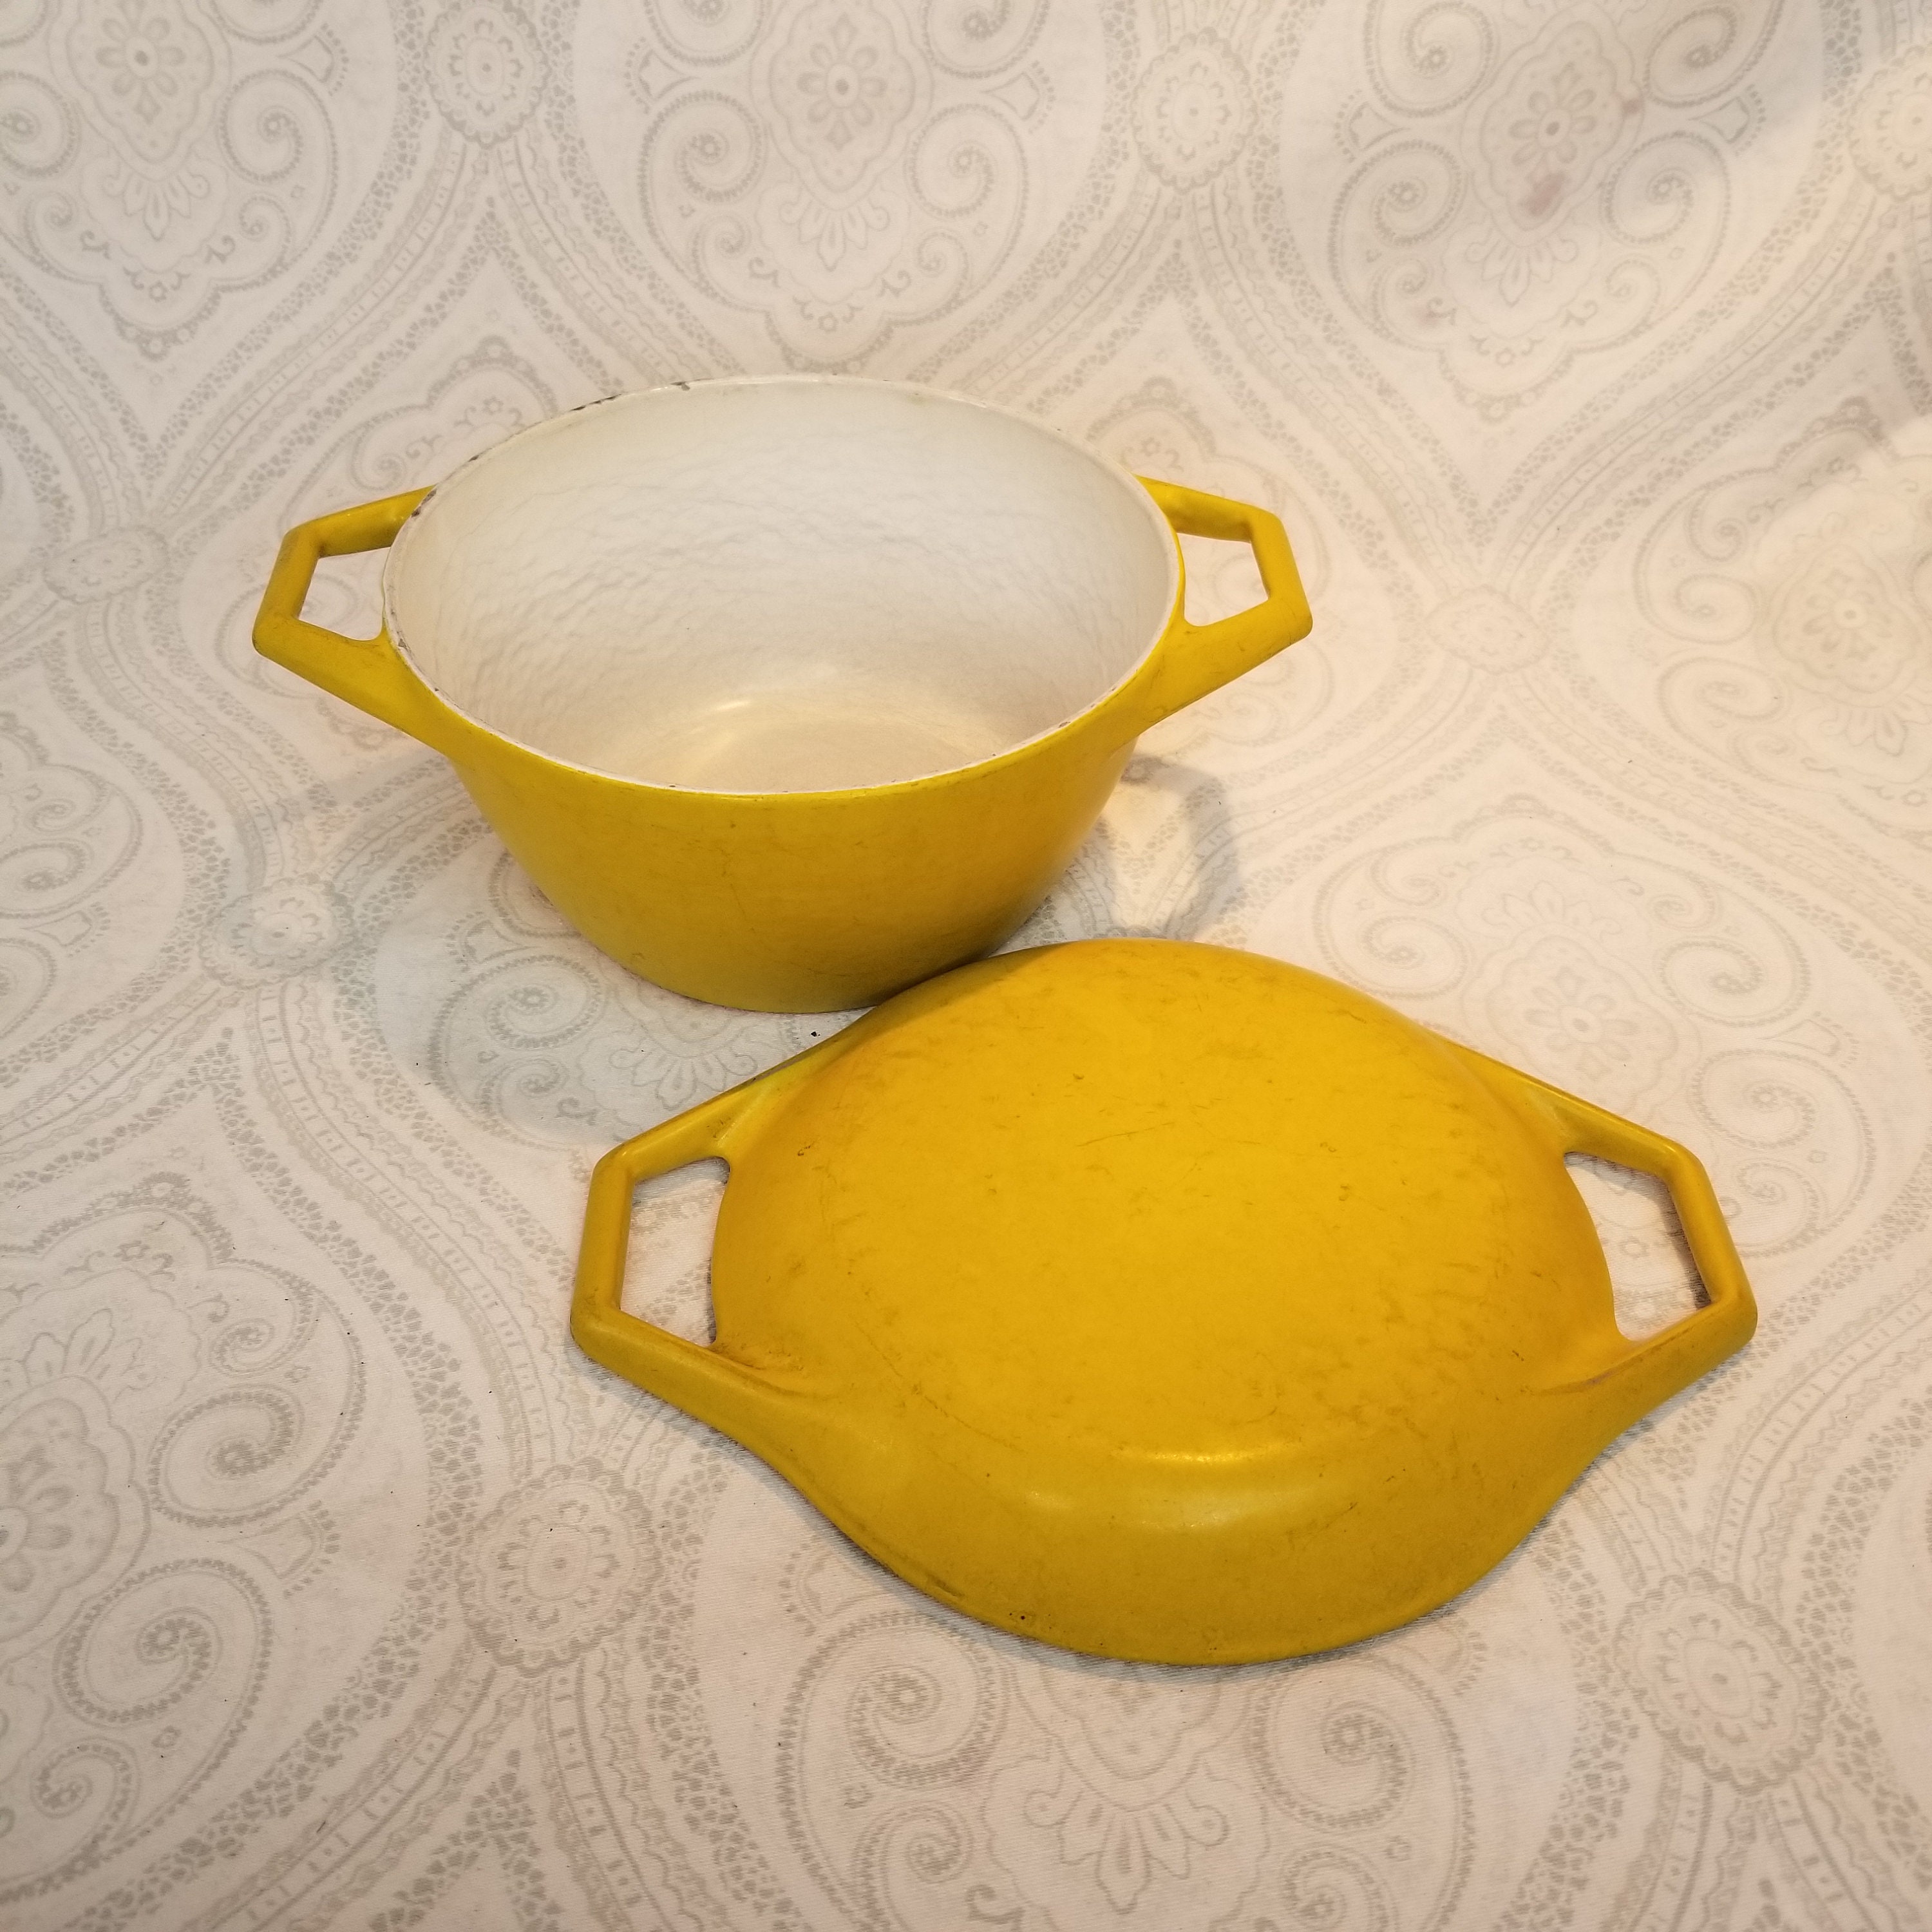 Kenmore 19247 5.5 Quart Cast Iron Enameled Coated Dutch Oven in Yellow